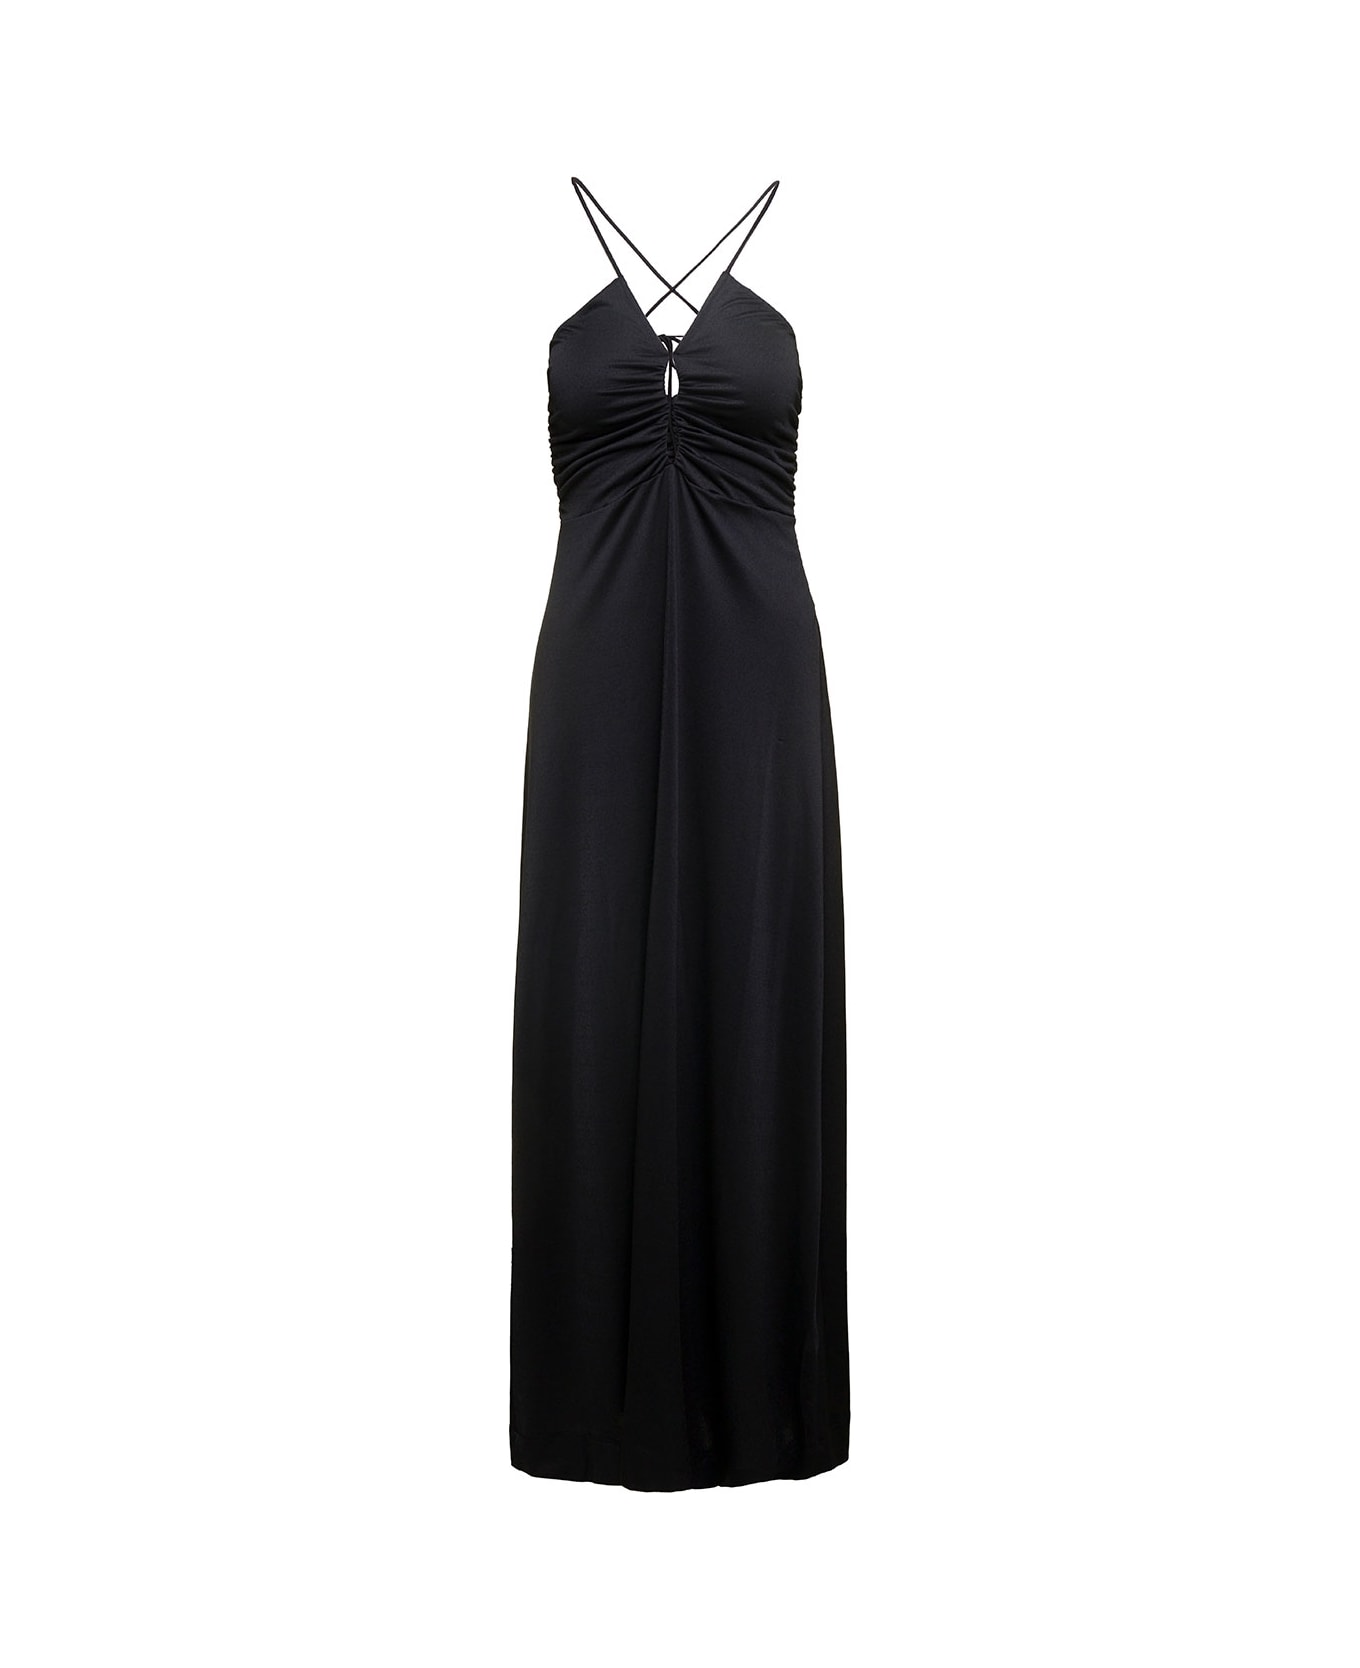 Ganni Maxi Black Dress With Drawstring And Criss-cross Straps In Jersey Woman - Black